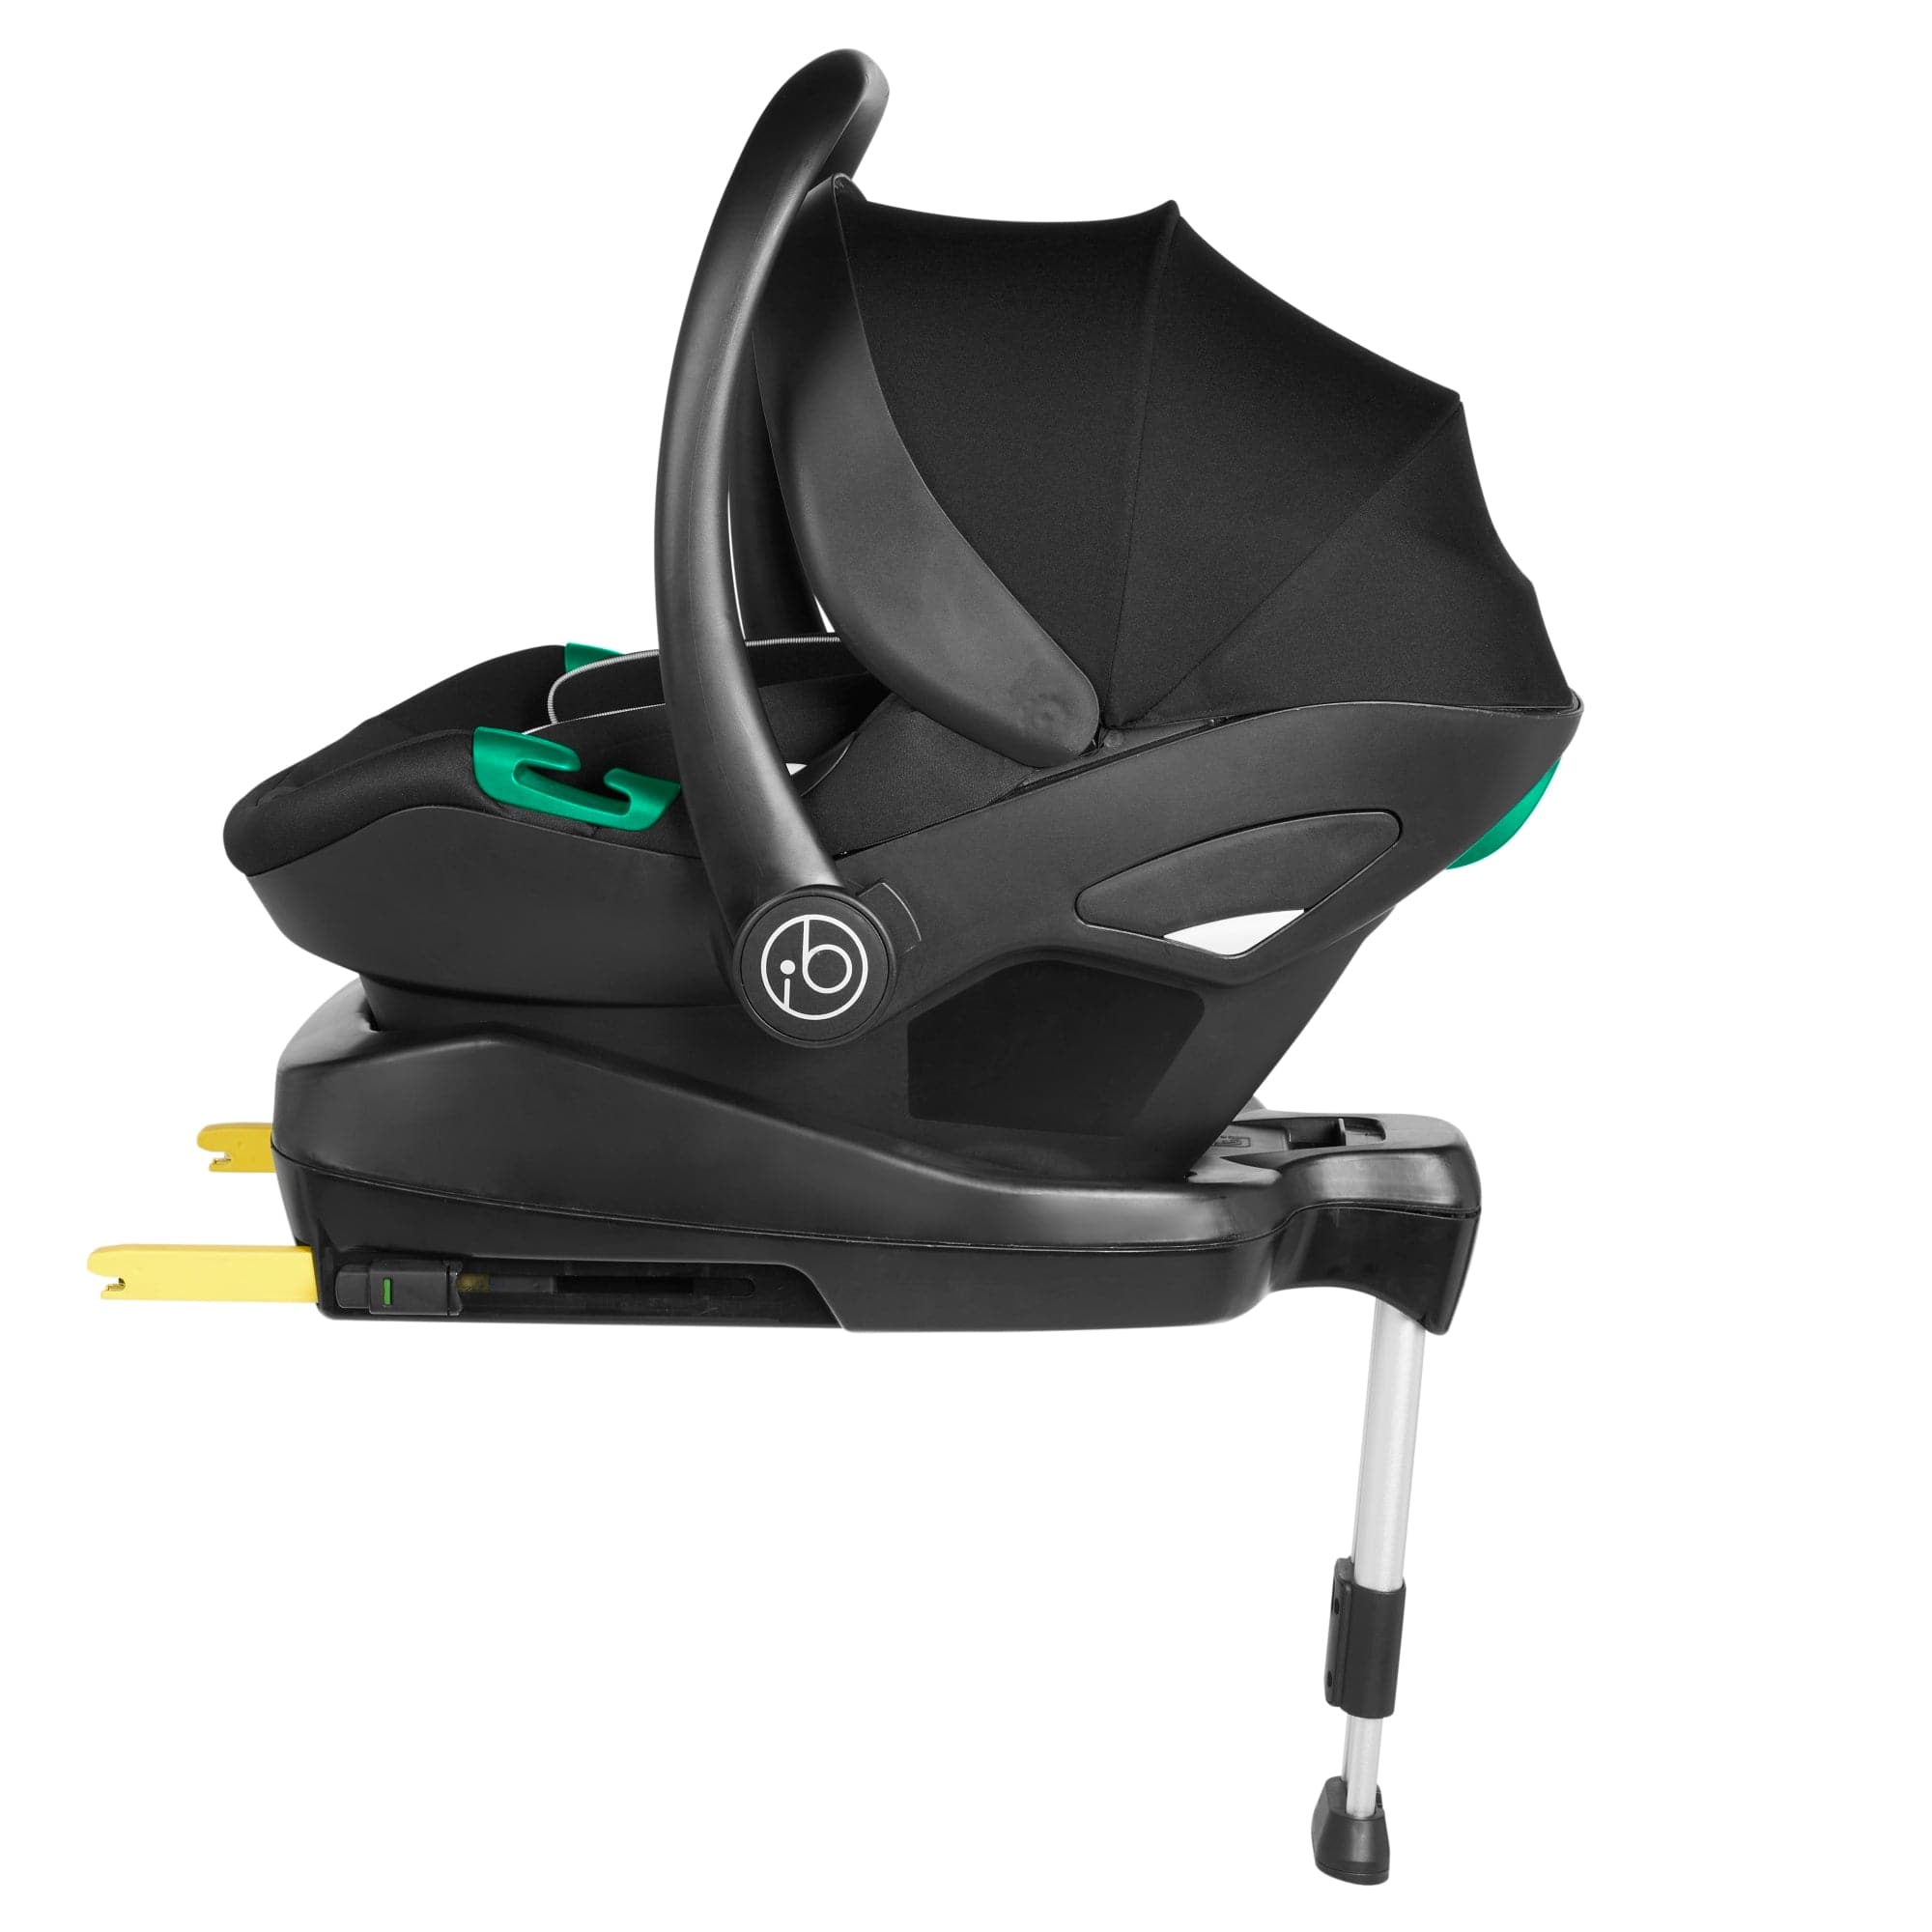 Ickle Bubba Comet I-Size Travel System With Stratus Car Seat & Isofix Base- Black - For Your Little One